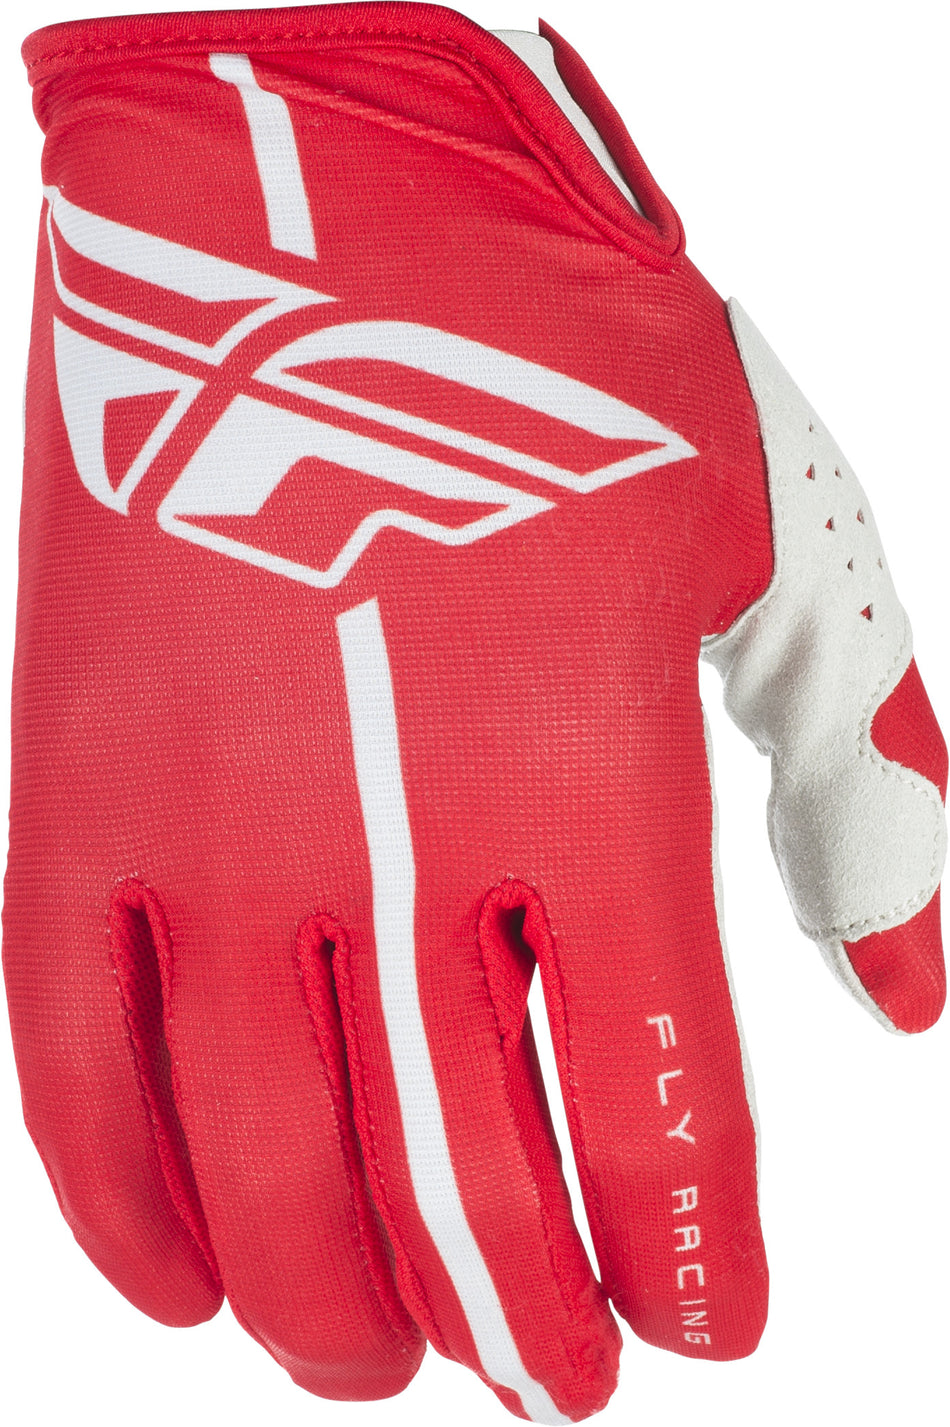 FLY RACING Lite Gloves Red/Grey Sz 13 371-01213